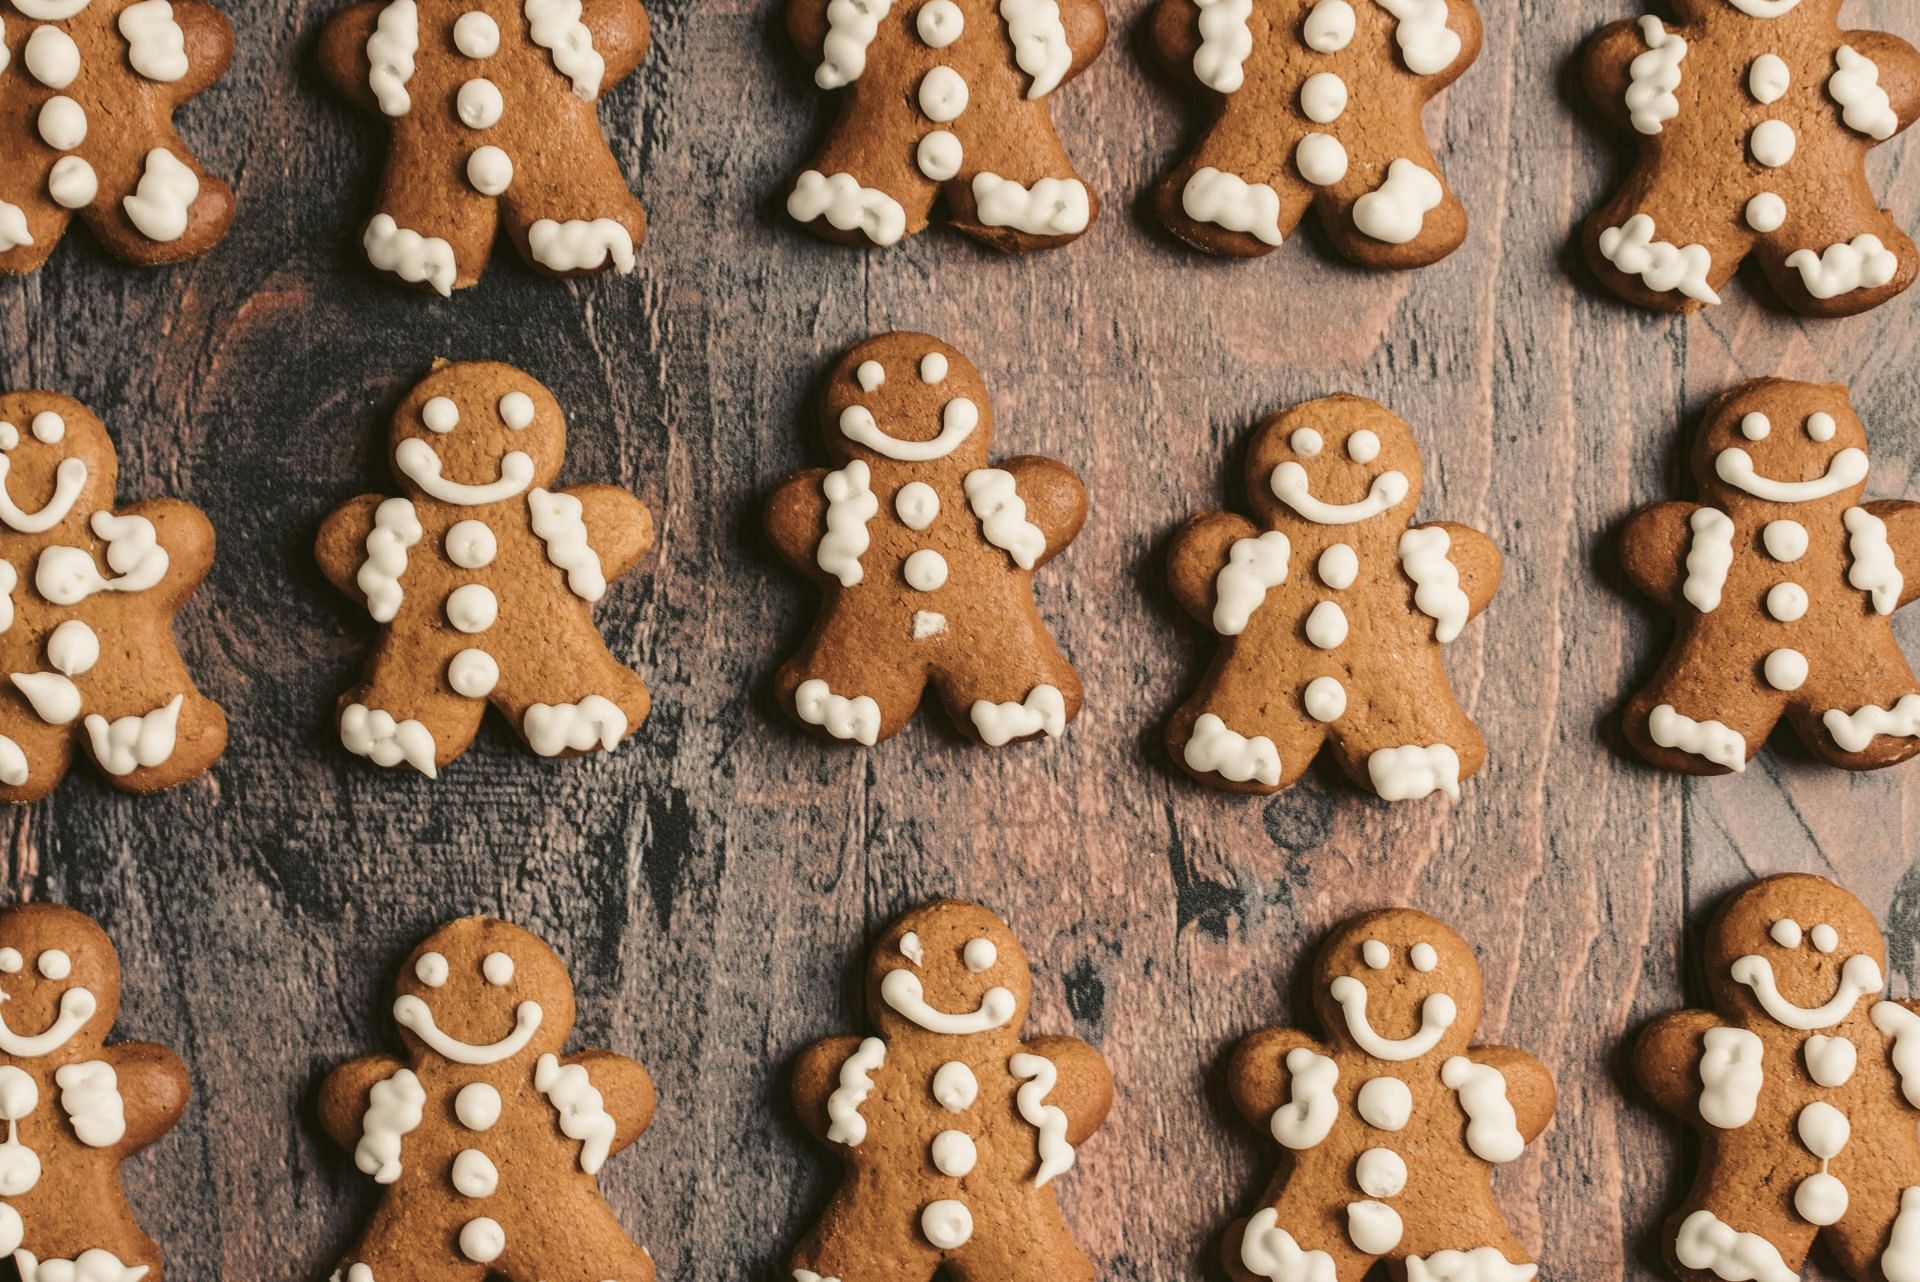 Cookies for girl scouts (image sourced via Pexels / Photo by taryn)